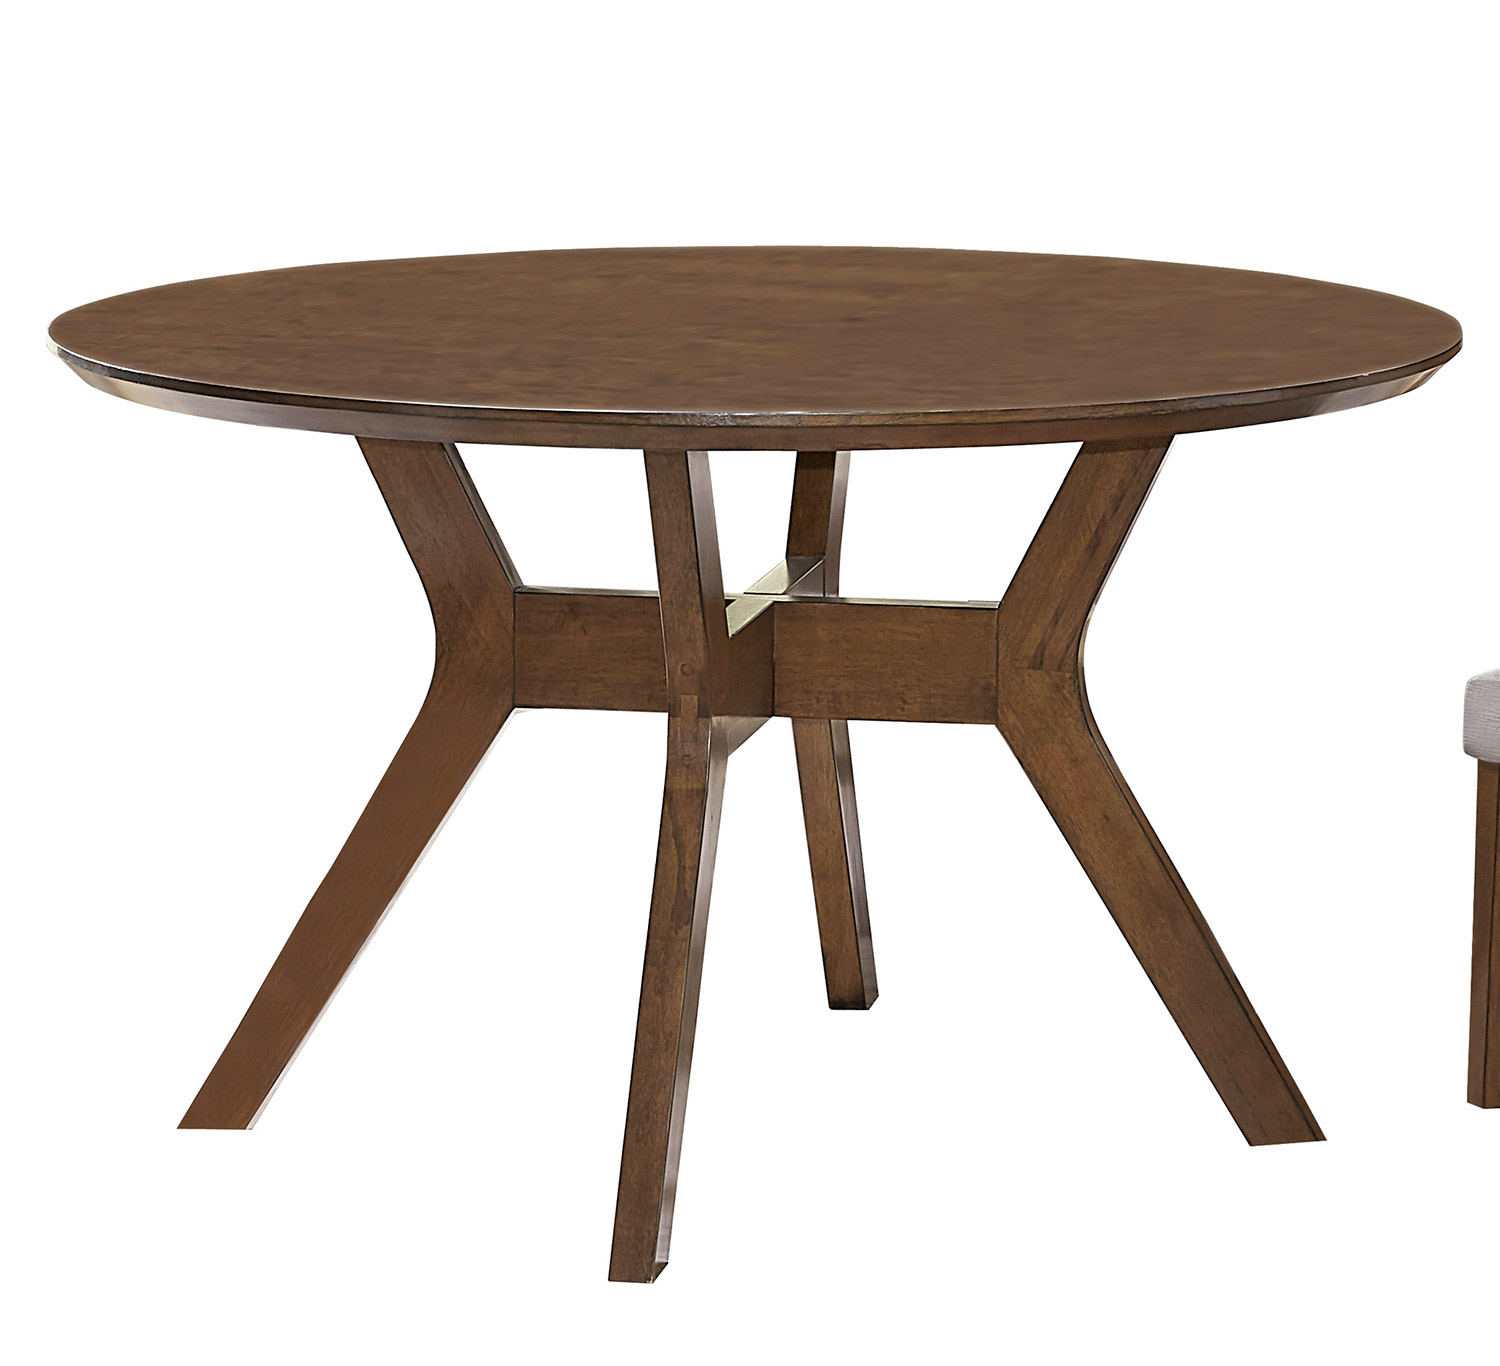 Homelegance Edam Round Dining Table - Natural